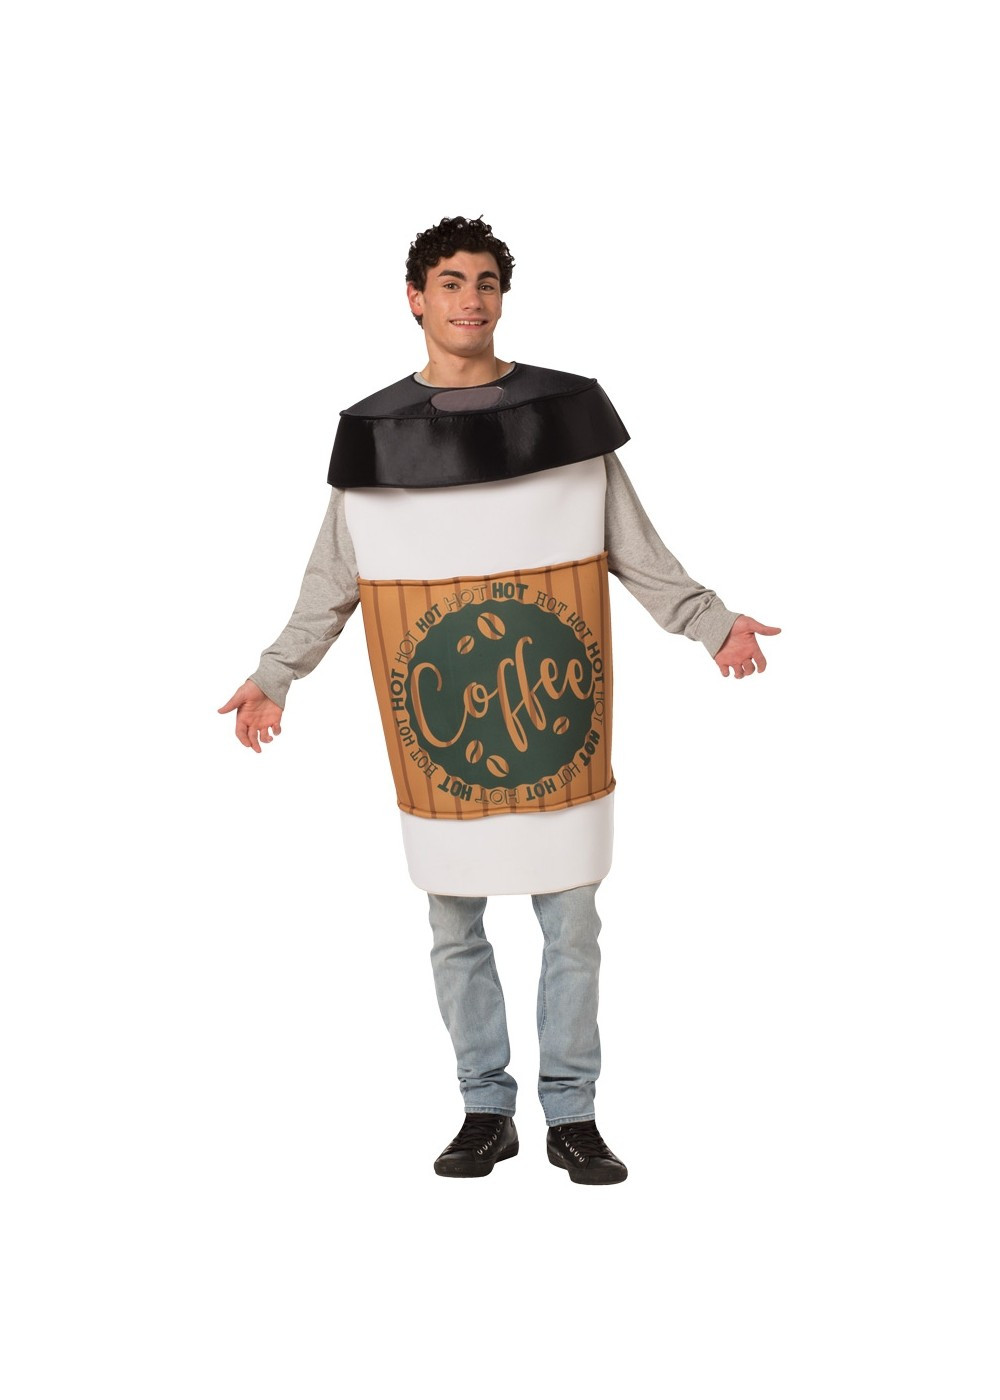 Male Halloween Costume Ideas 2020
 Big selection of 2020 Halloween Costumes for Men